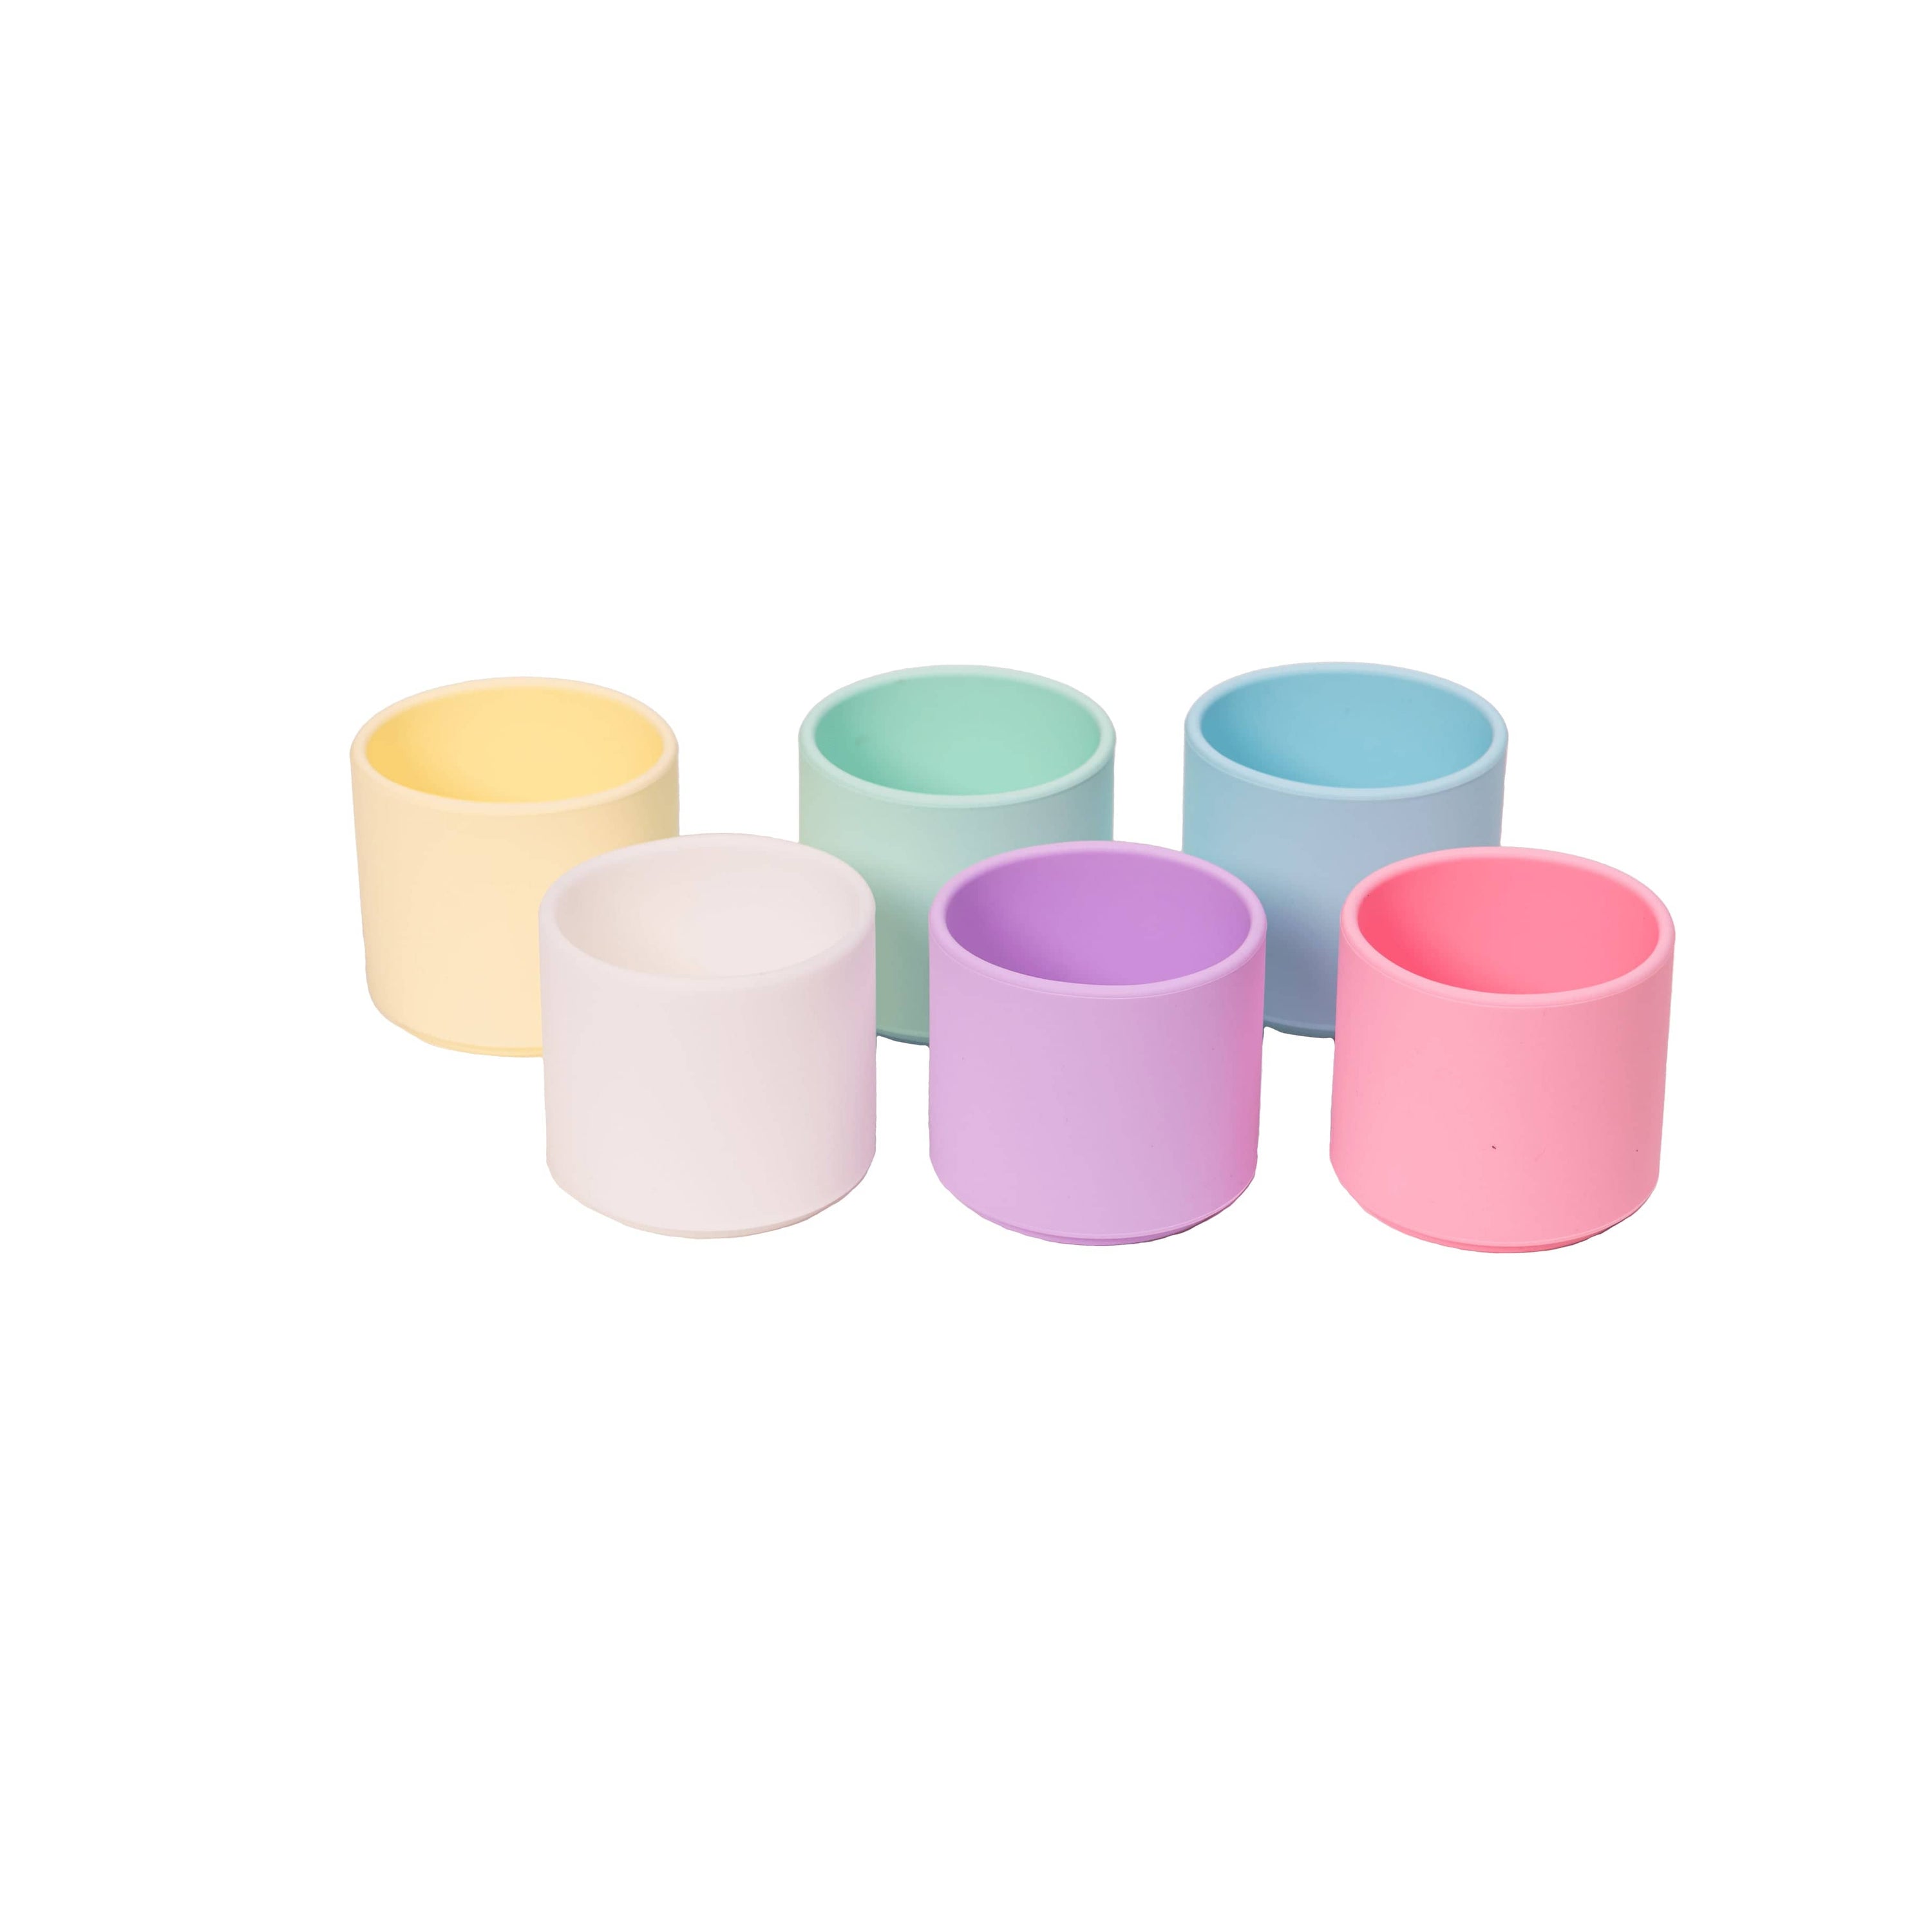 dëna 6 Pastel Stacking Cups Dena Pacifiers & Teethers Lil Tulips